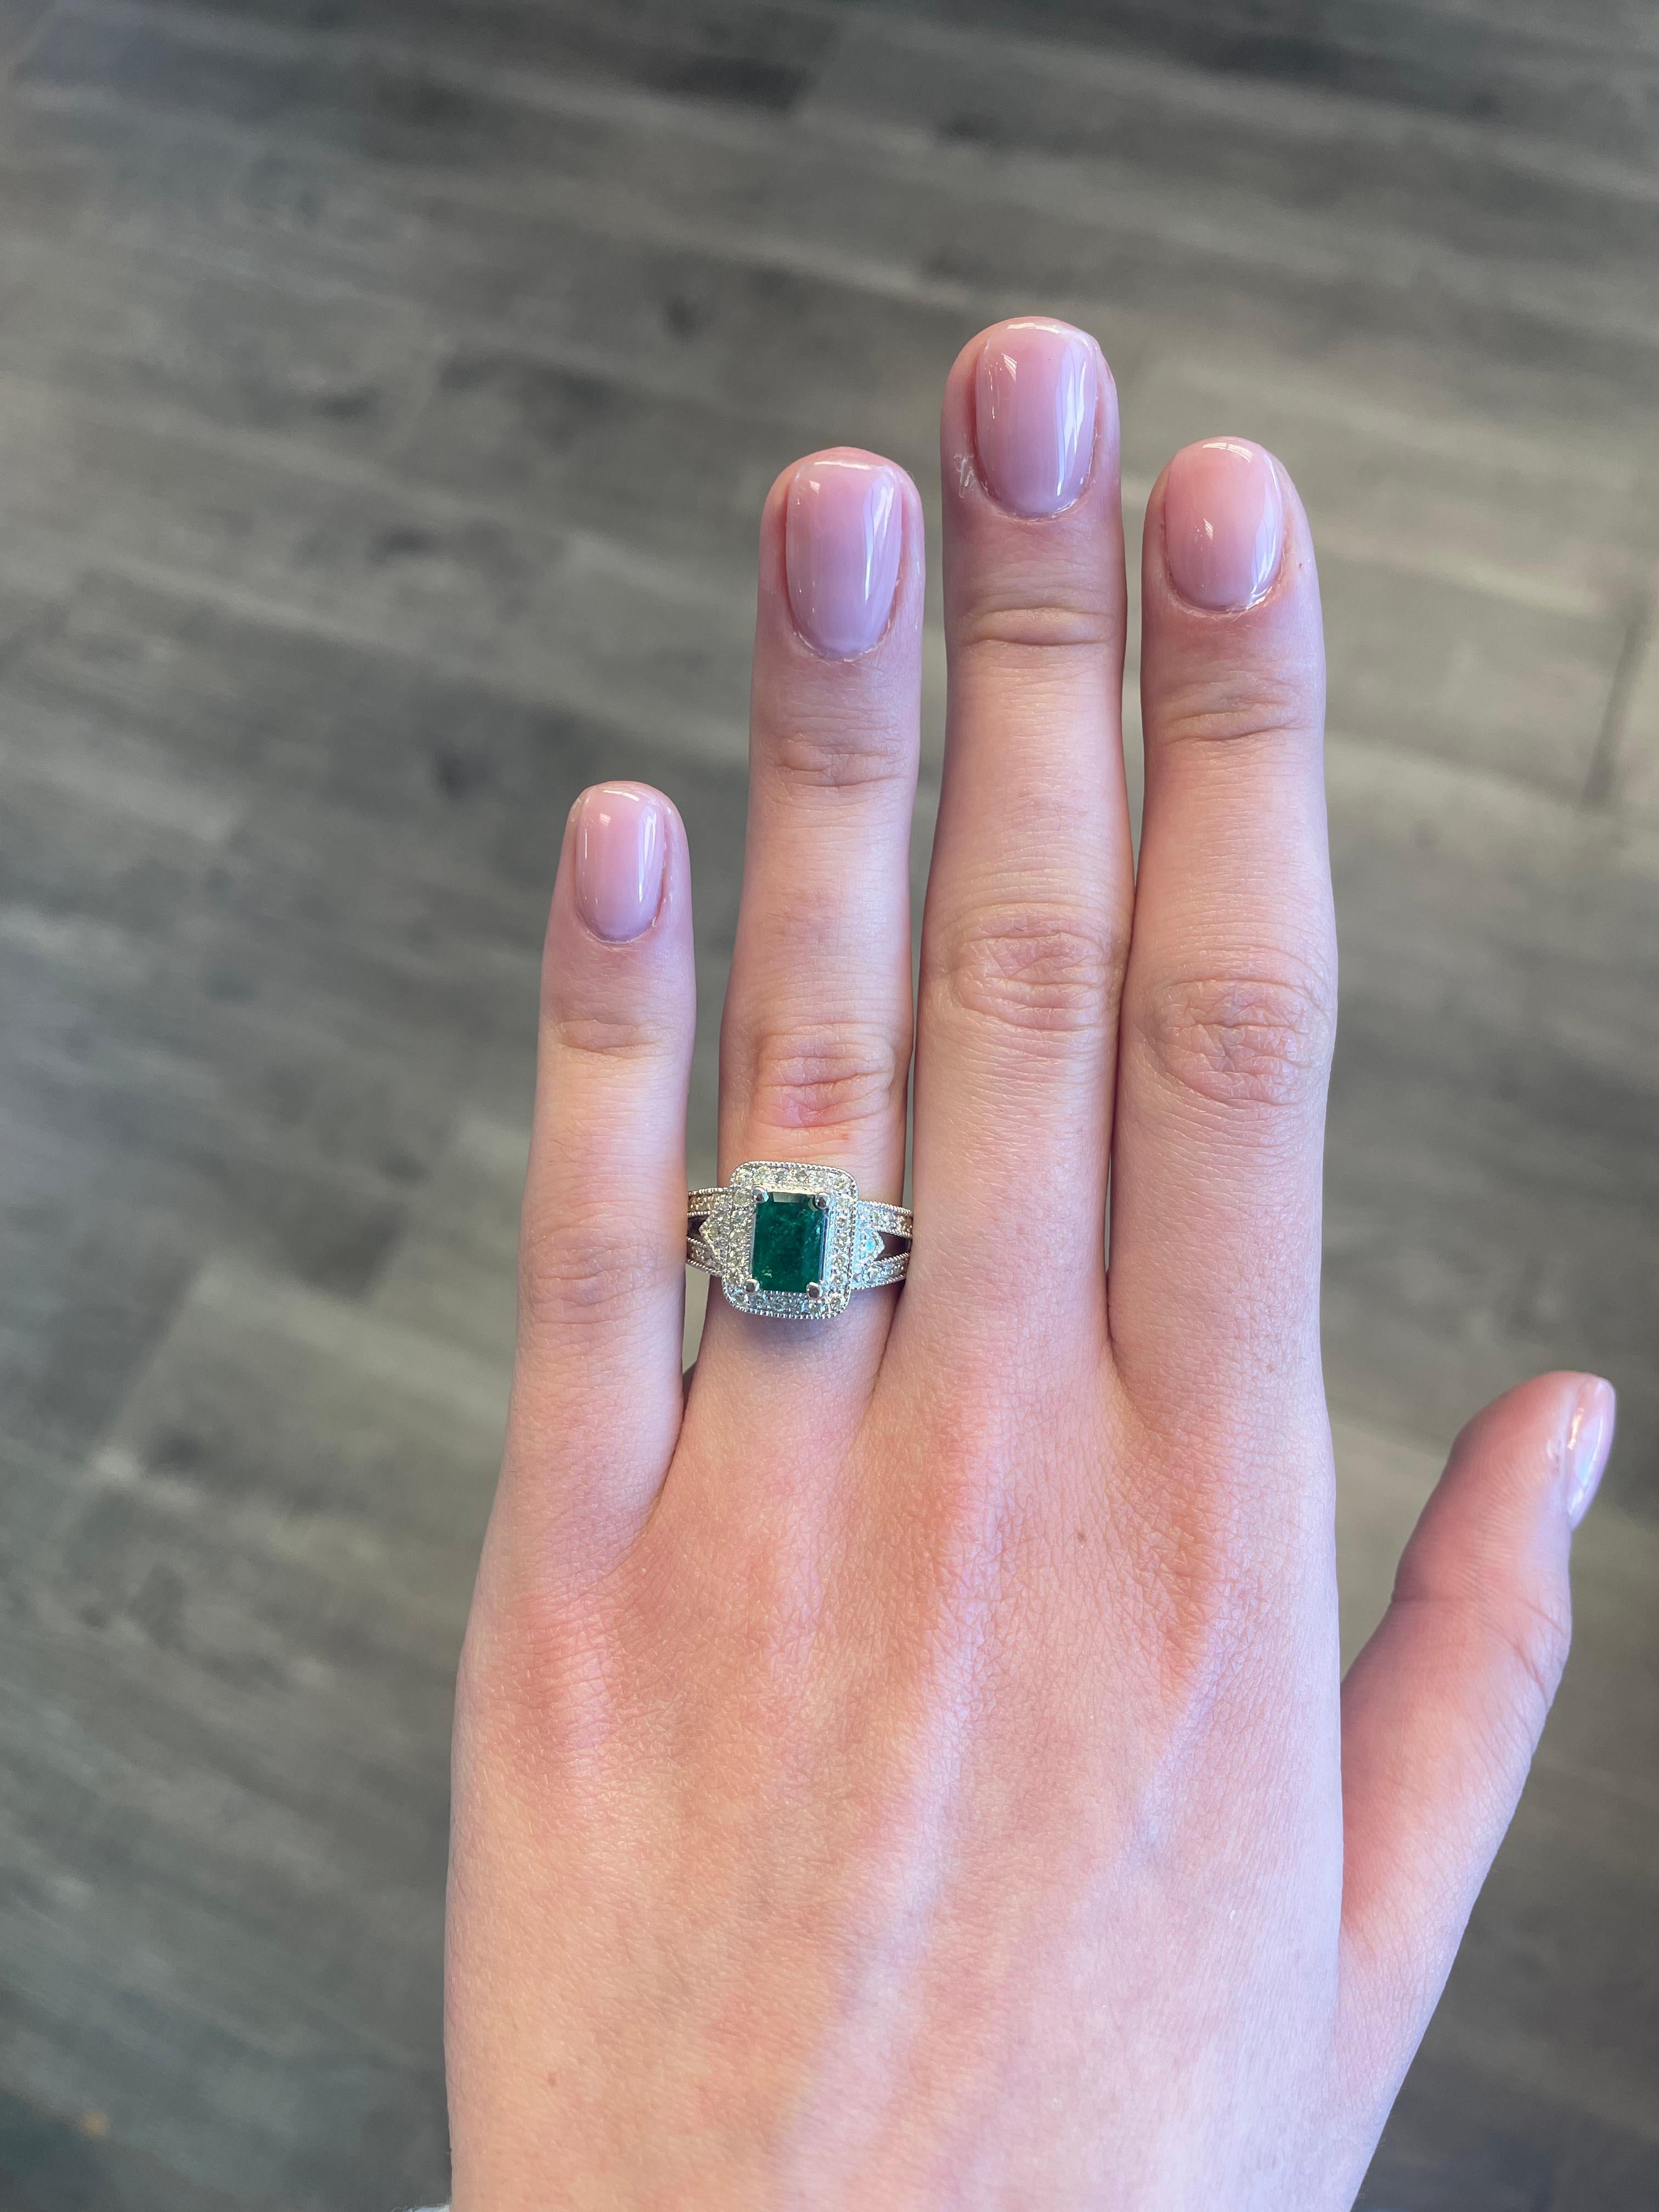 Art Deco inspired emerald and diamond halo ring with split shank, millgrain filigree work.
1.73 carats total gemstone weight.
1.03 carat emerald cut emerald, apx F2. Complimented by 0.70 carats of round diamonds, approximately I/J color and SI